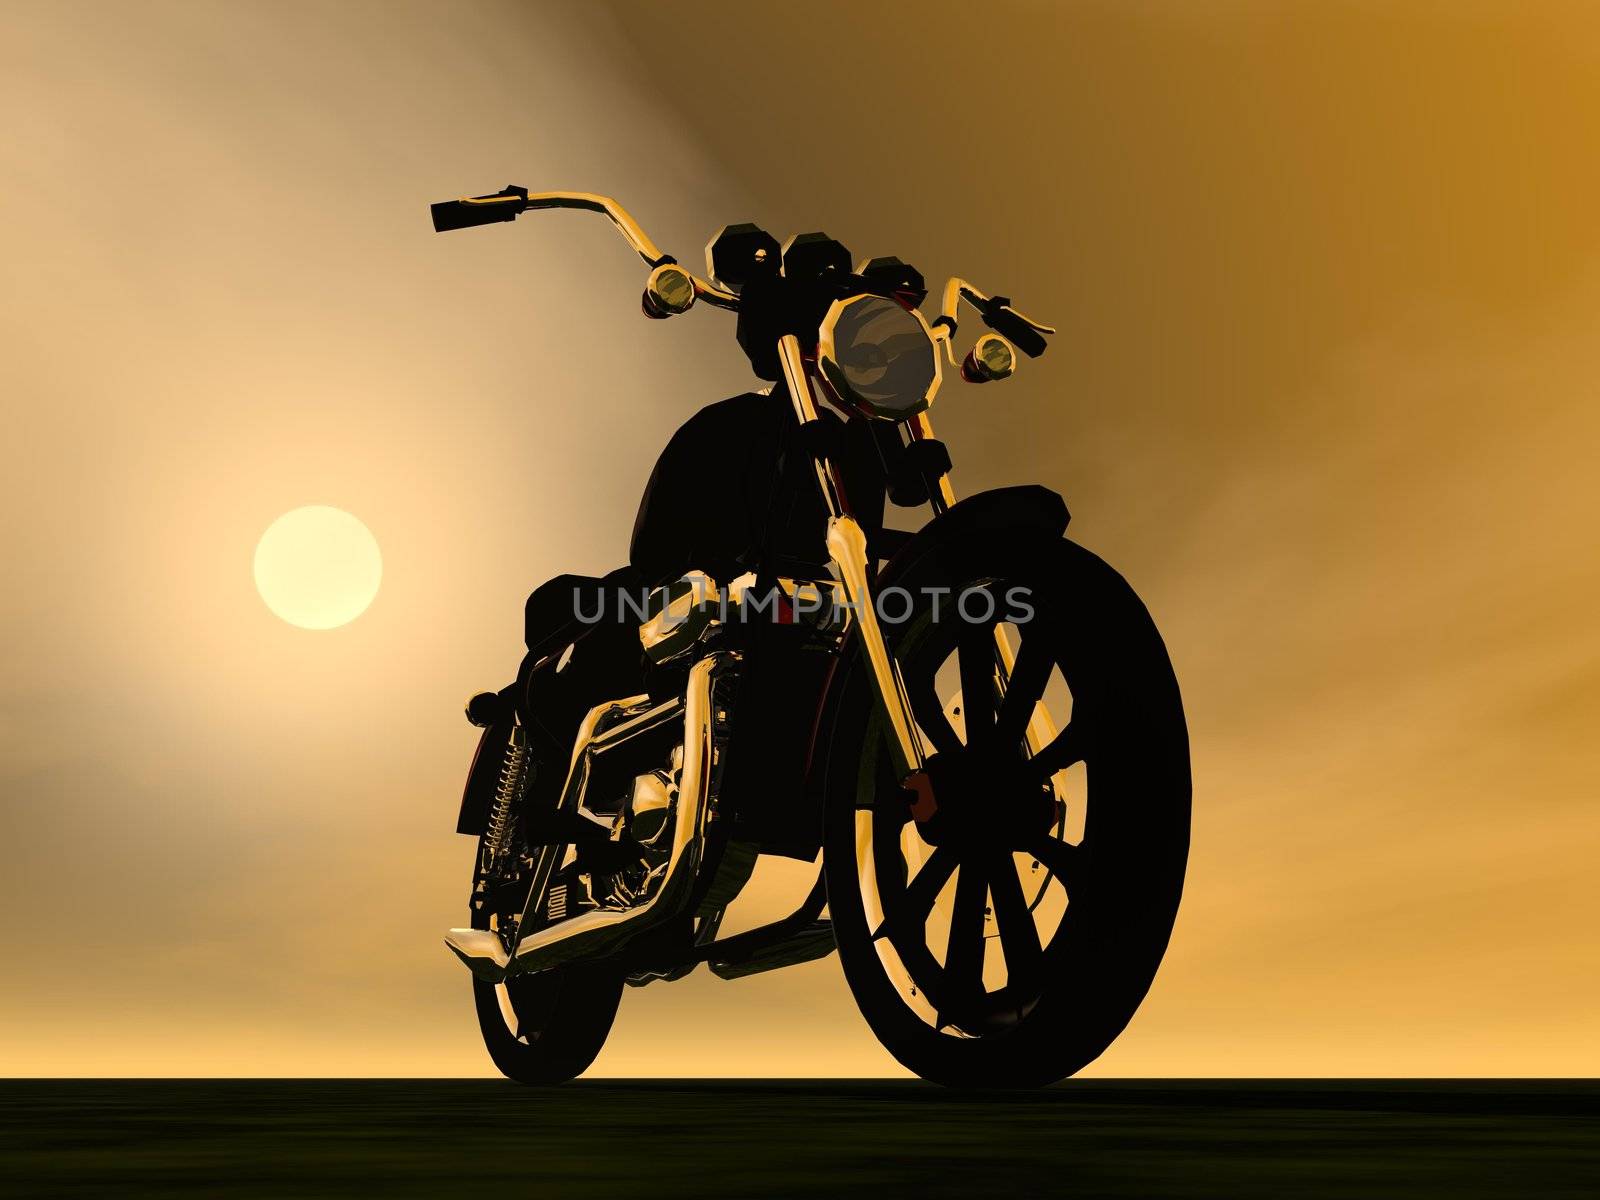 Shadow of a motorbike with metallic reflections by sunset